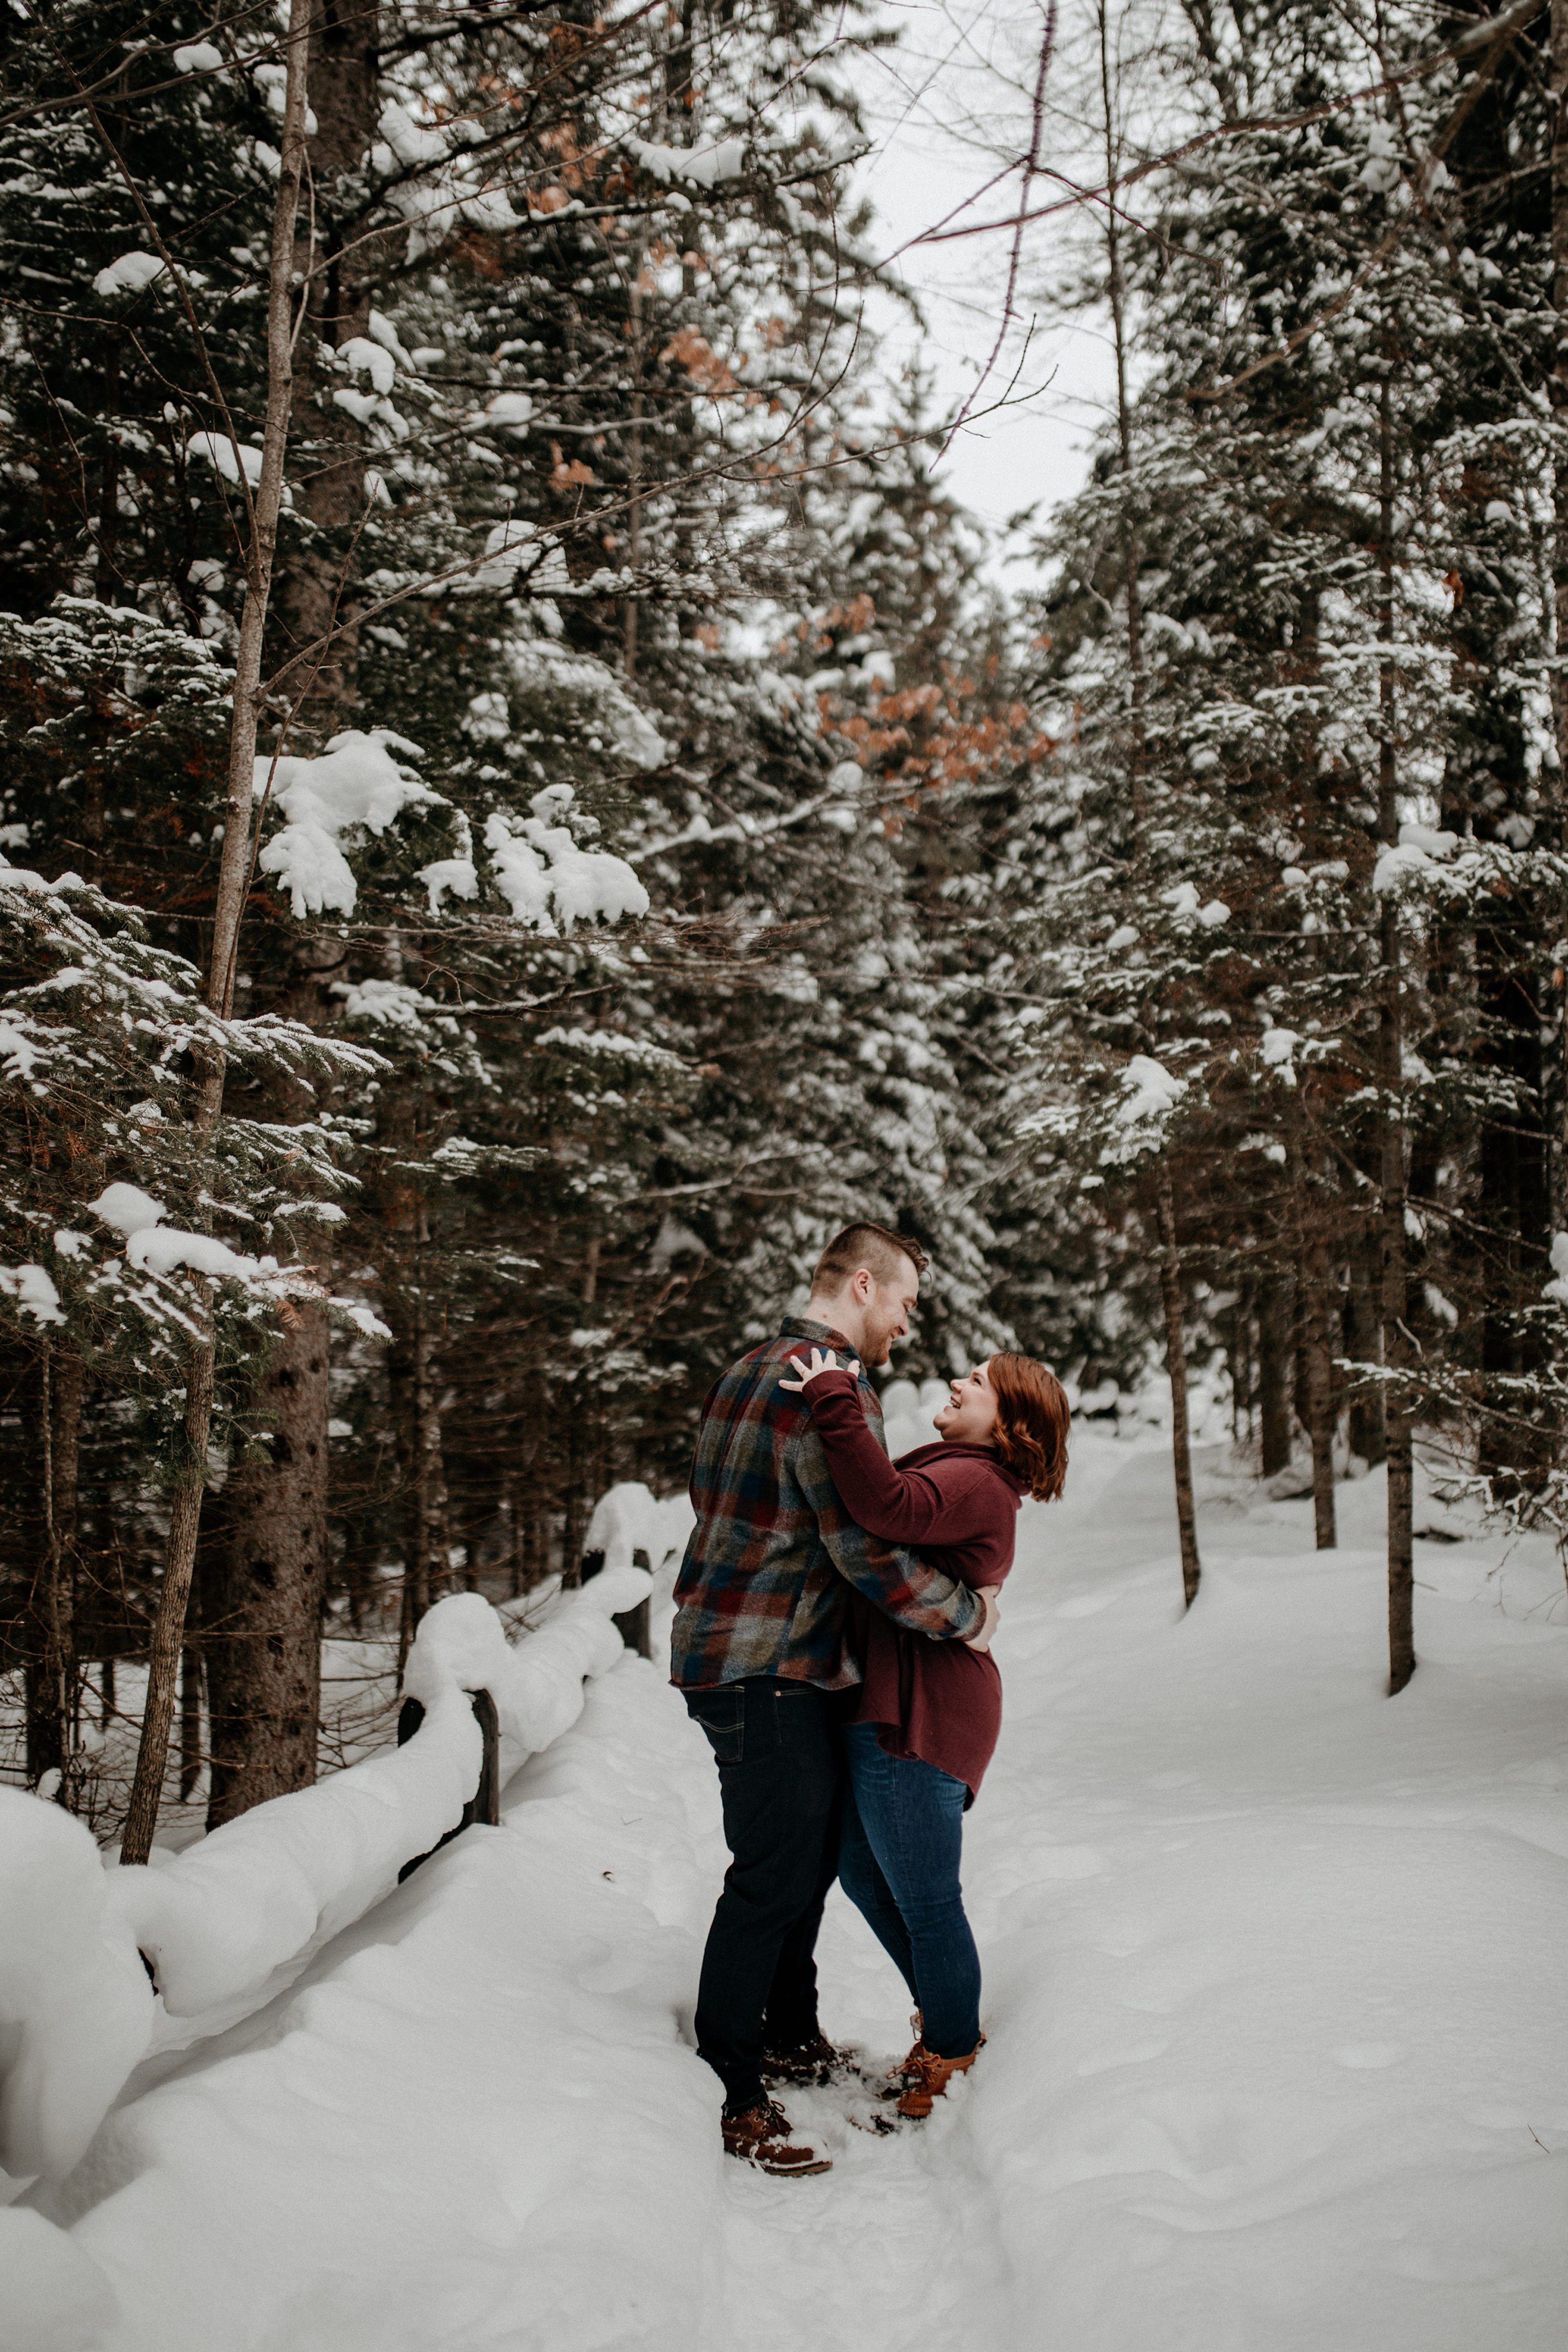 snowy outdoor engagement session,couples photos outdoor,cute couples photos,copper falls state park,copper falls state park engagement session,candid engagement session,winter couples photos,winter engagement session